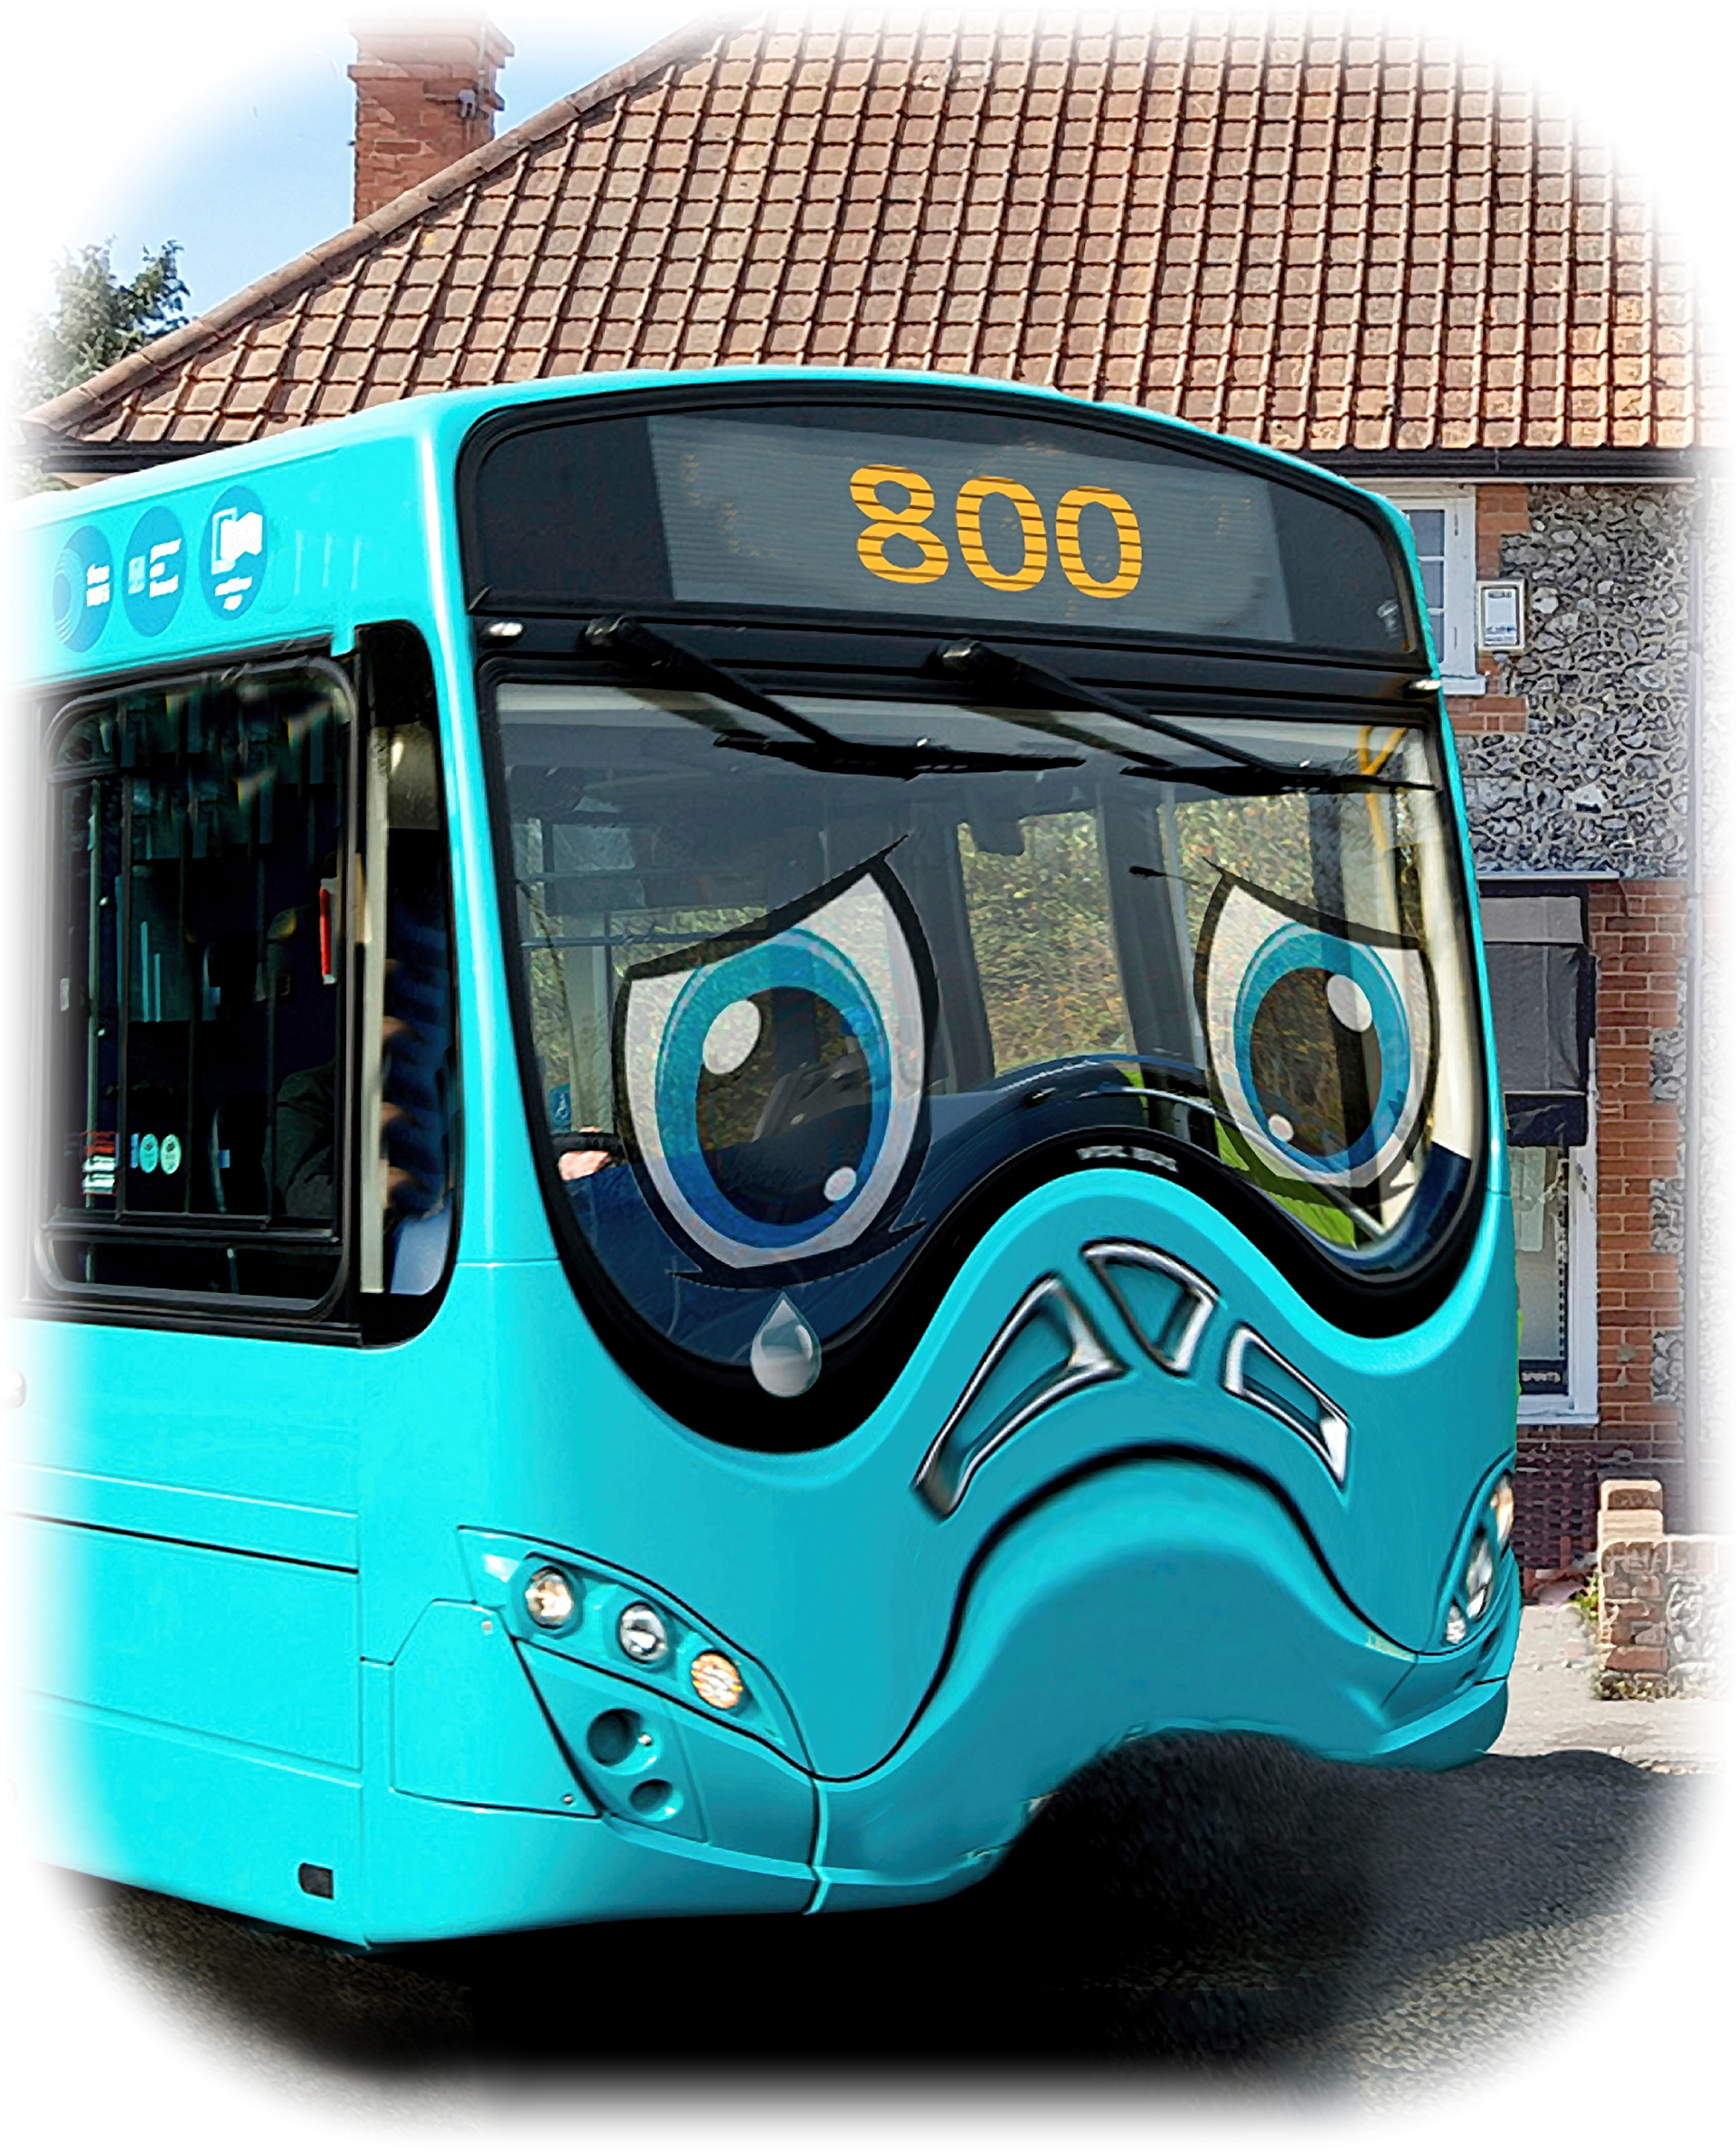 Image of a bus with a sad face sticker on the front